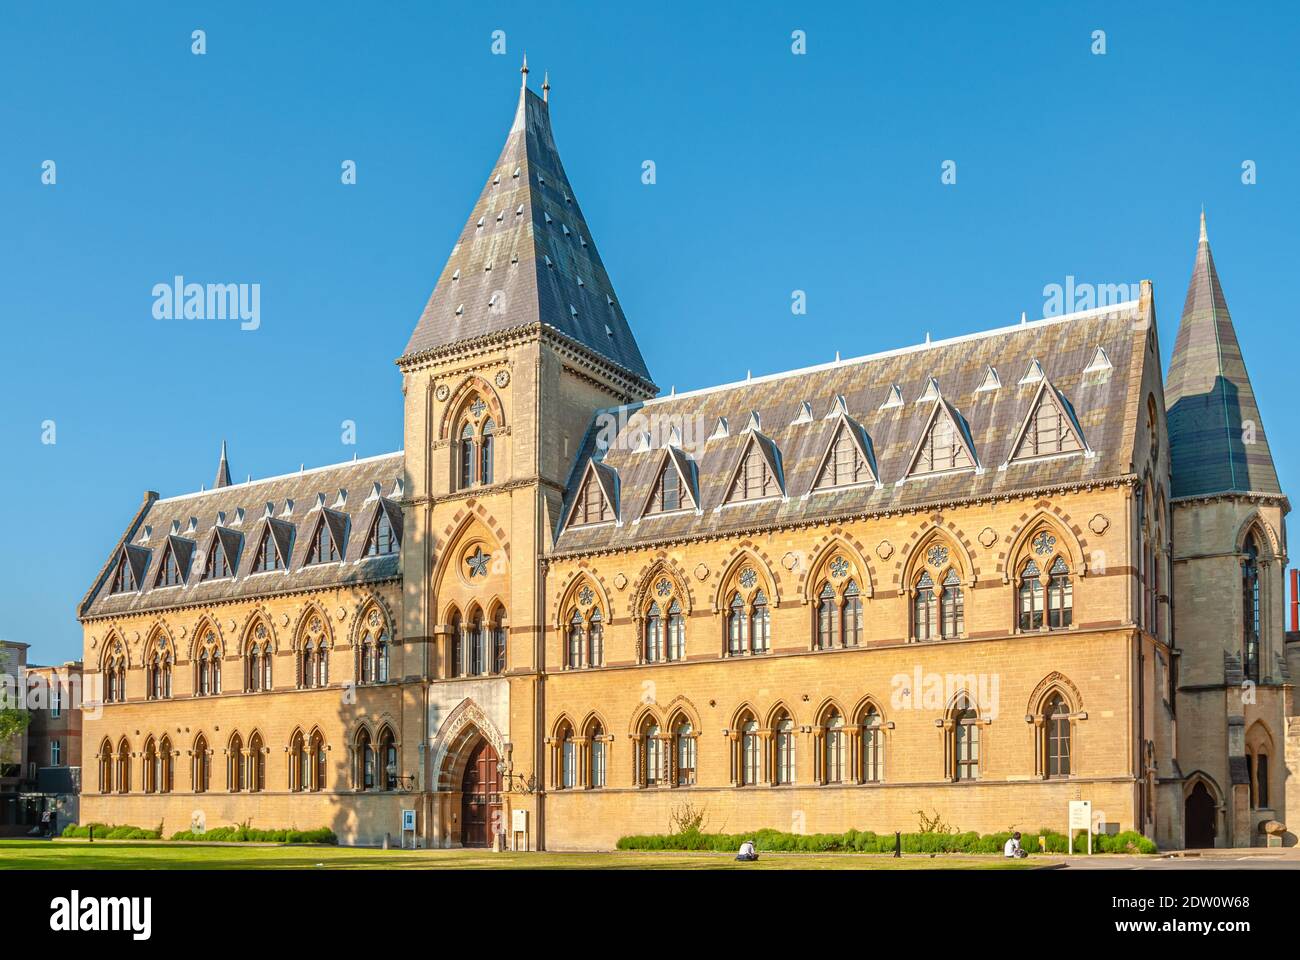 Oxford University Museum of Natural History, Oxfordshire, England Stockfoto